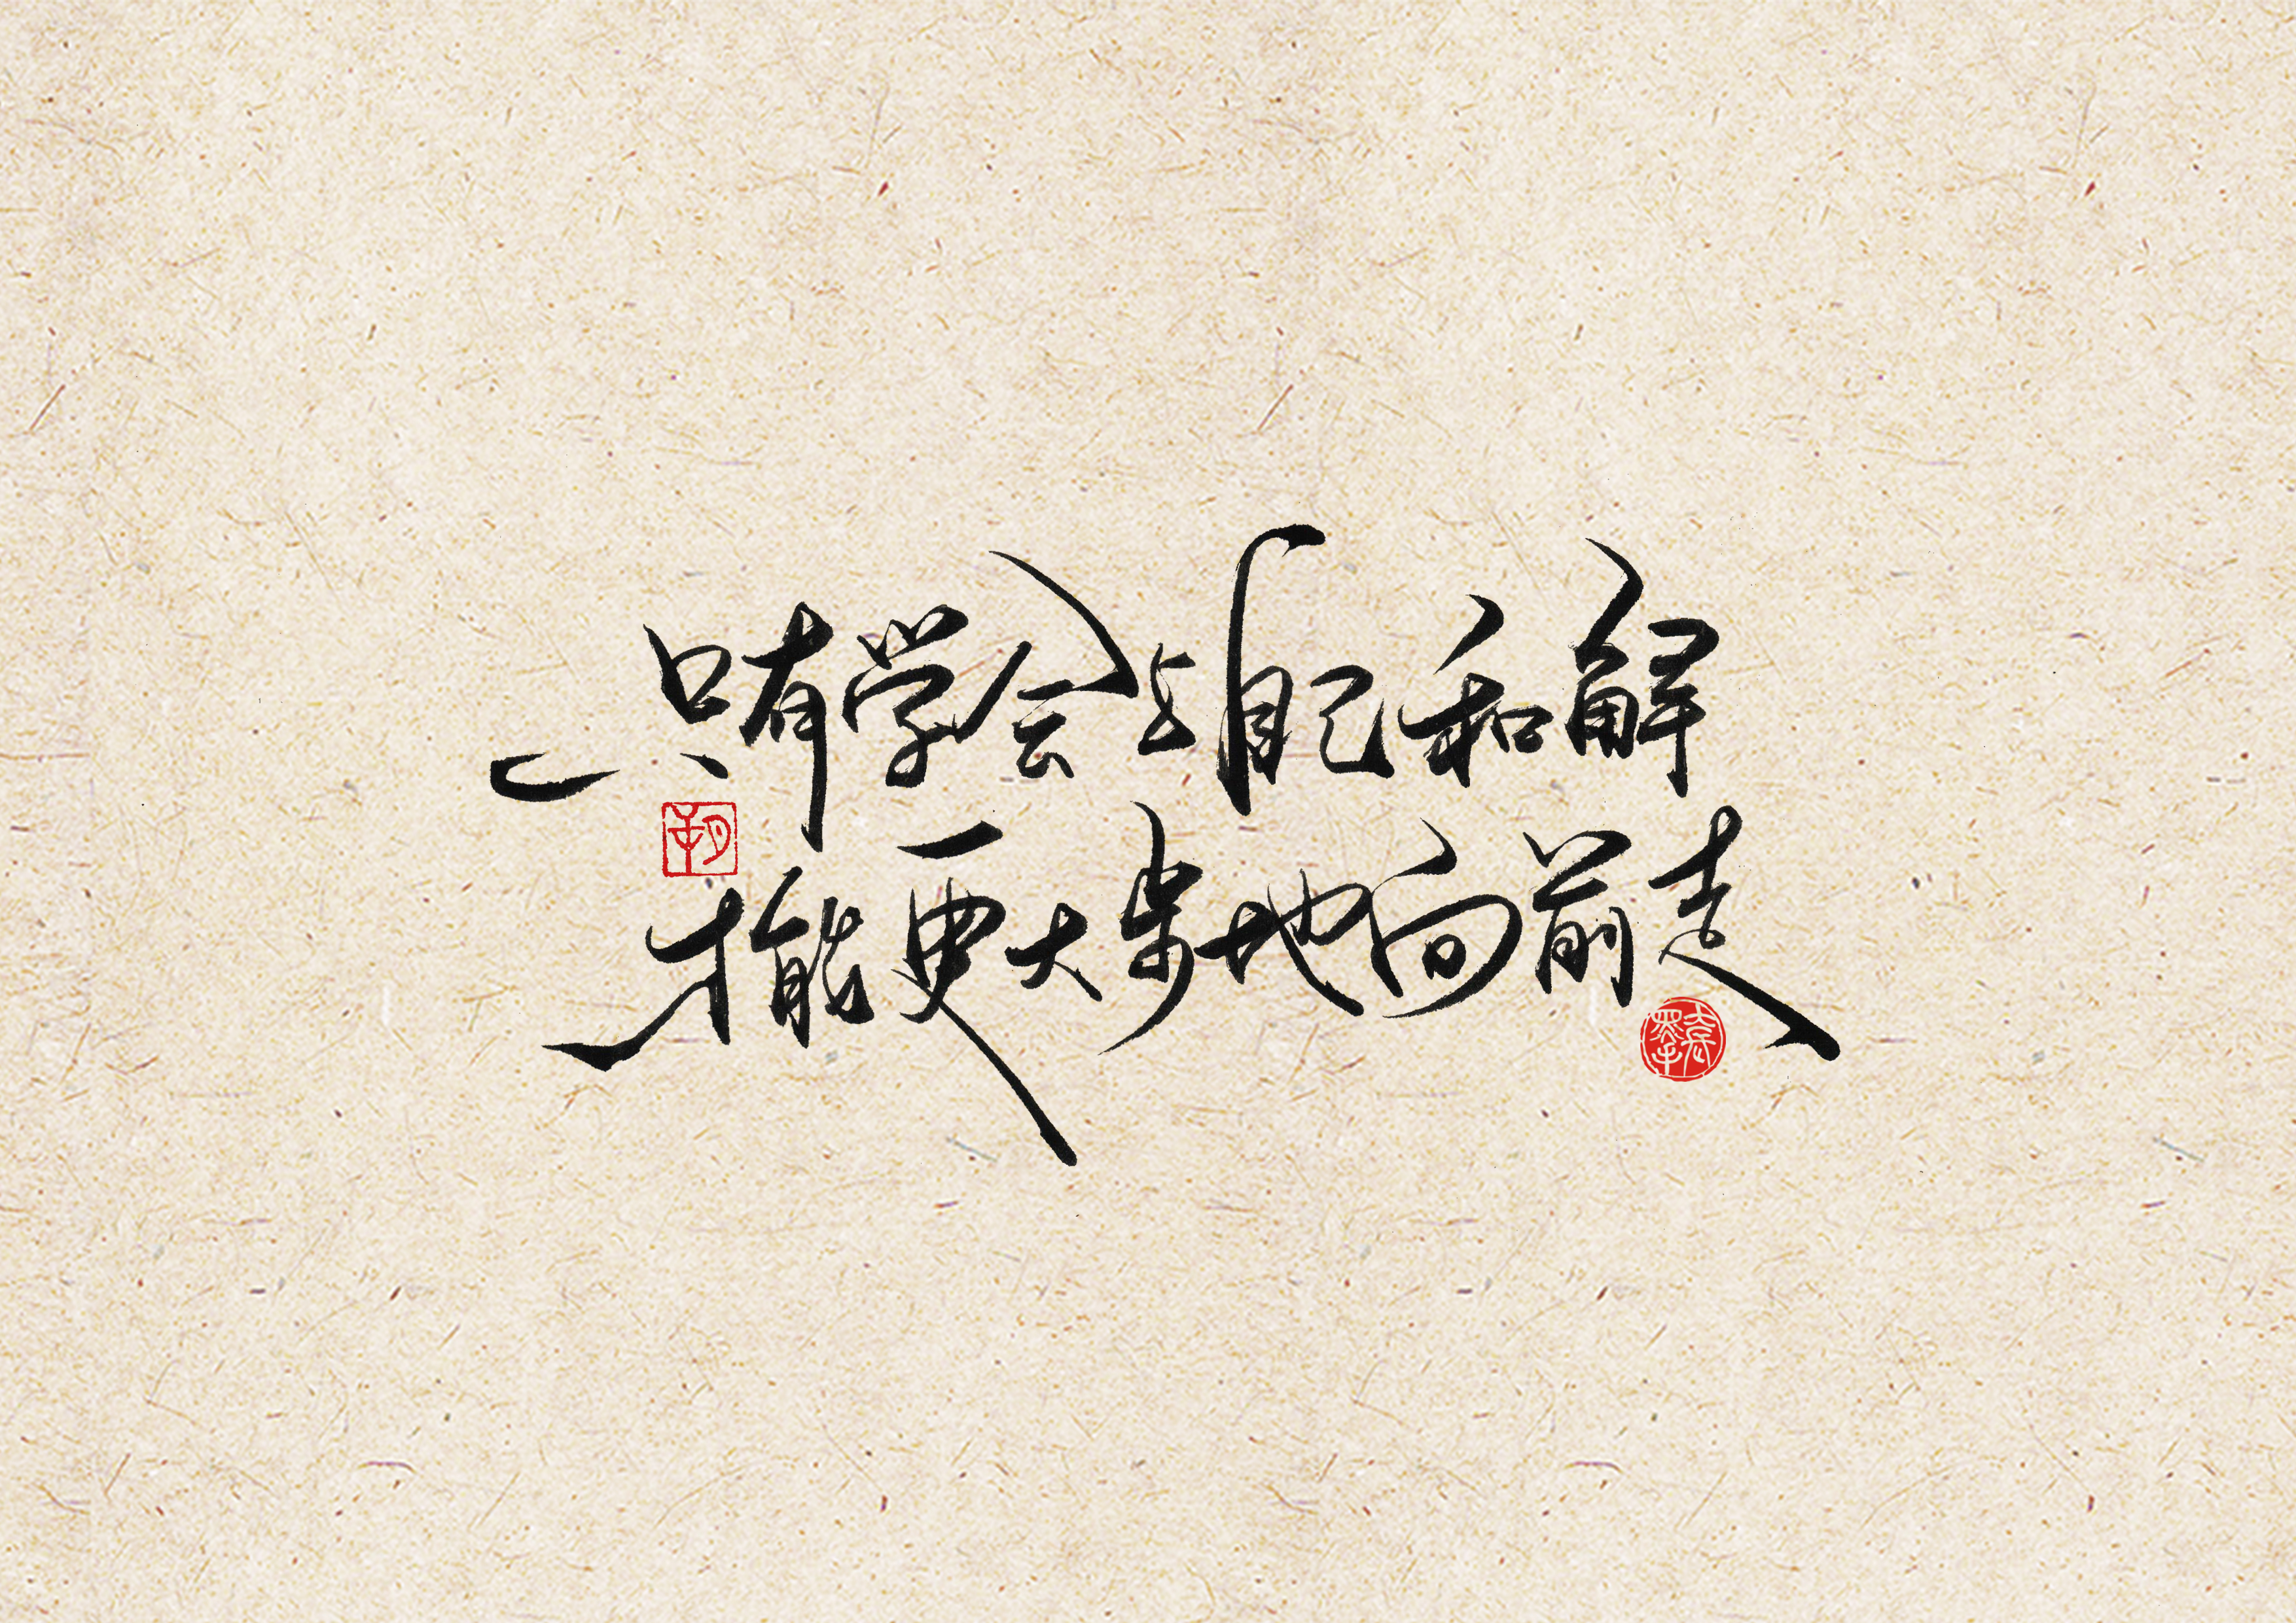 21P Chinese calligraphy design with retro style